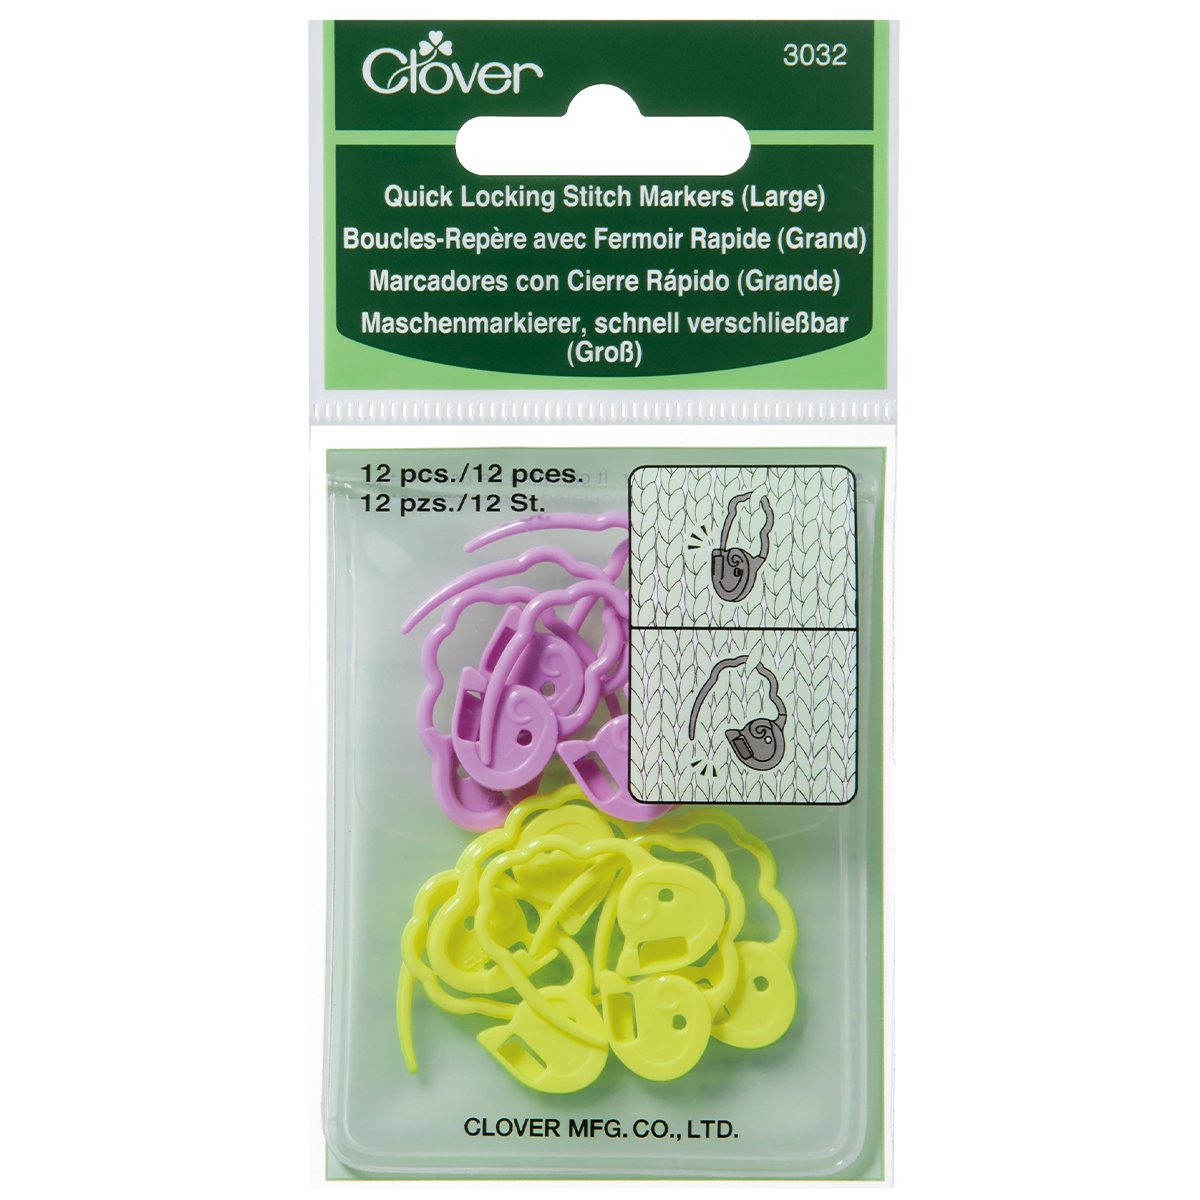 Clover Quick Locking Stitch Marker Set Review and Giveaway - moogly